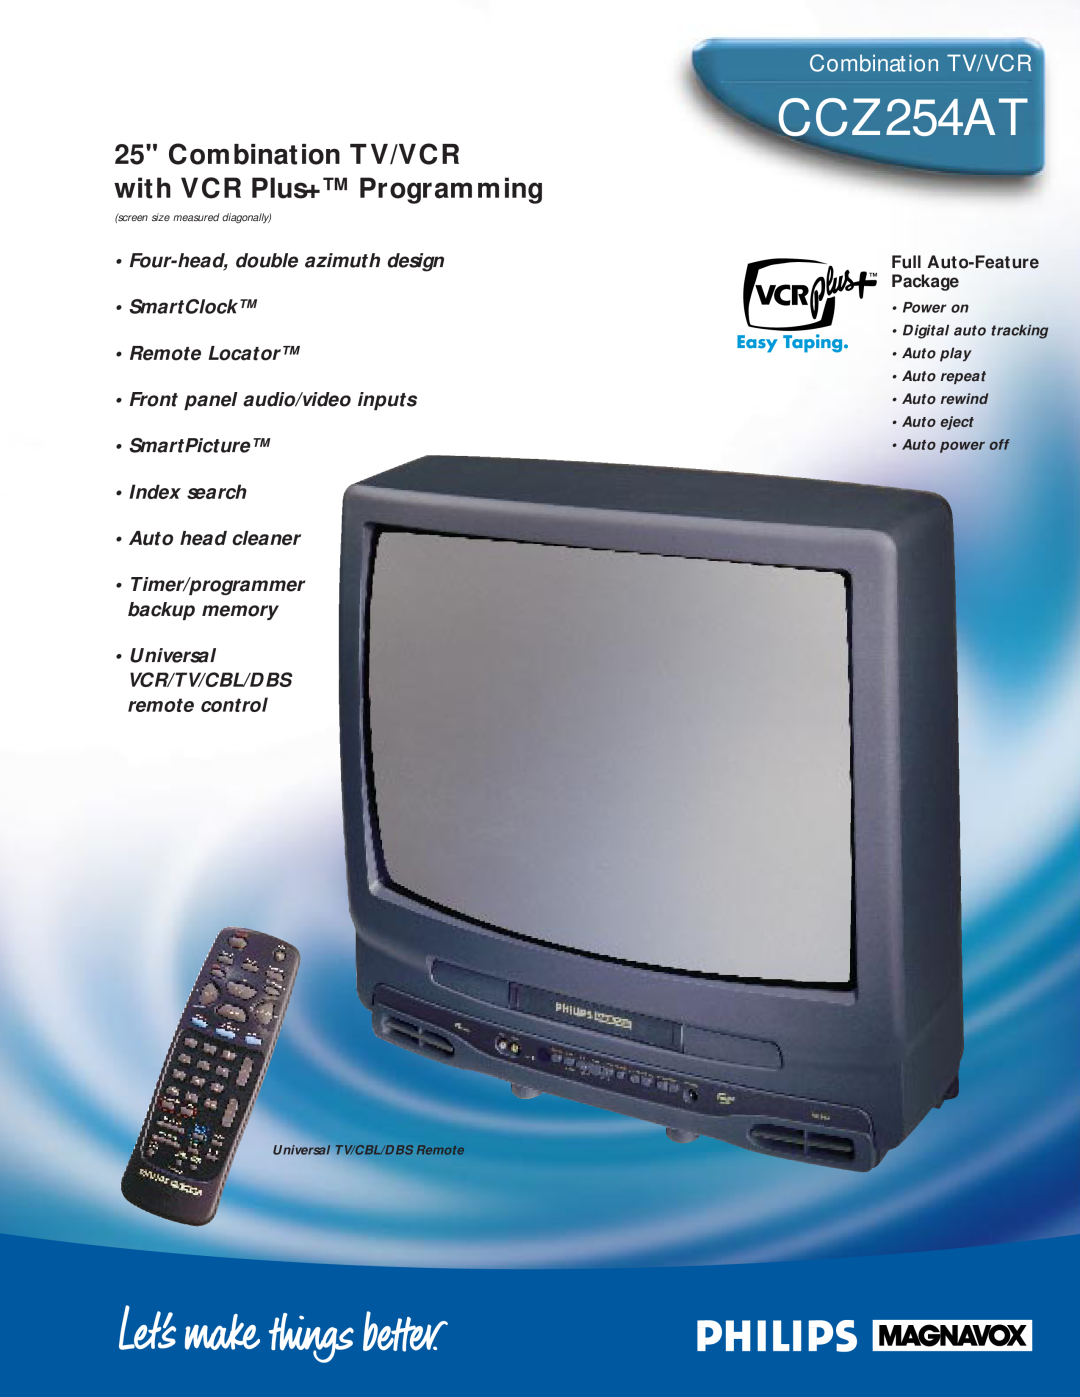 Philips CCZ254AT manual Full Auto-Feature Package, Combination TV/VCR with VCR Plus+ Programming, Auto head cleaner 